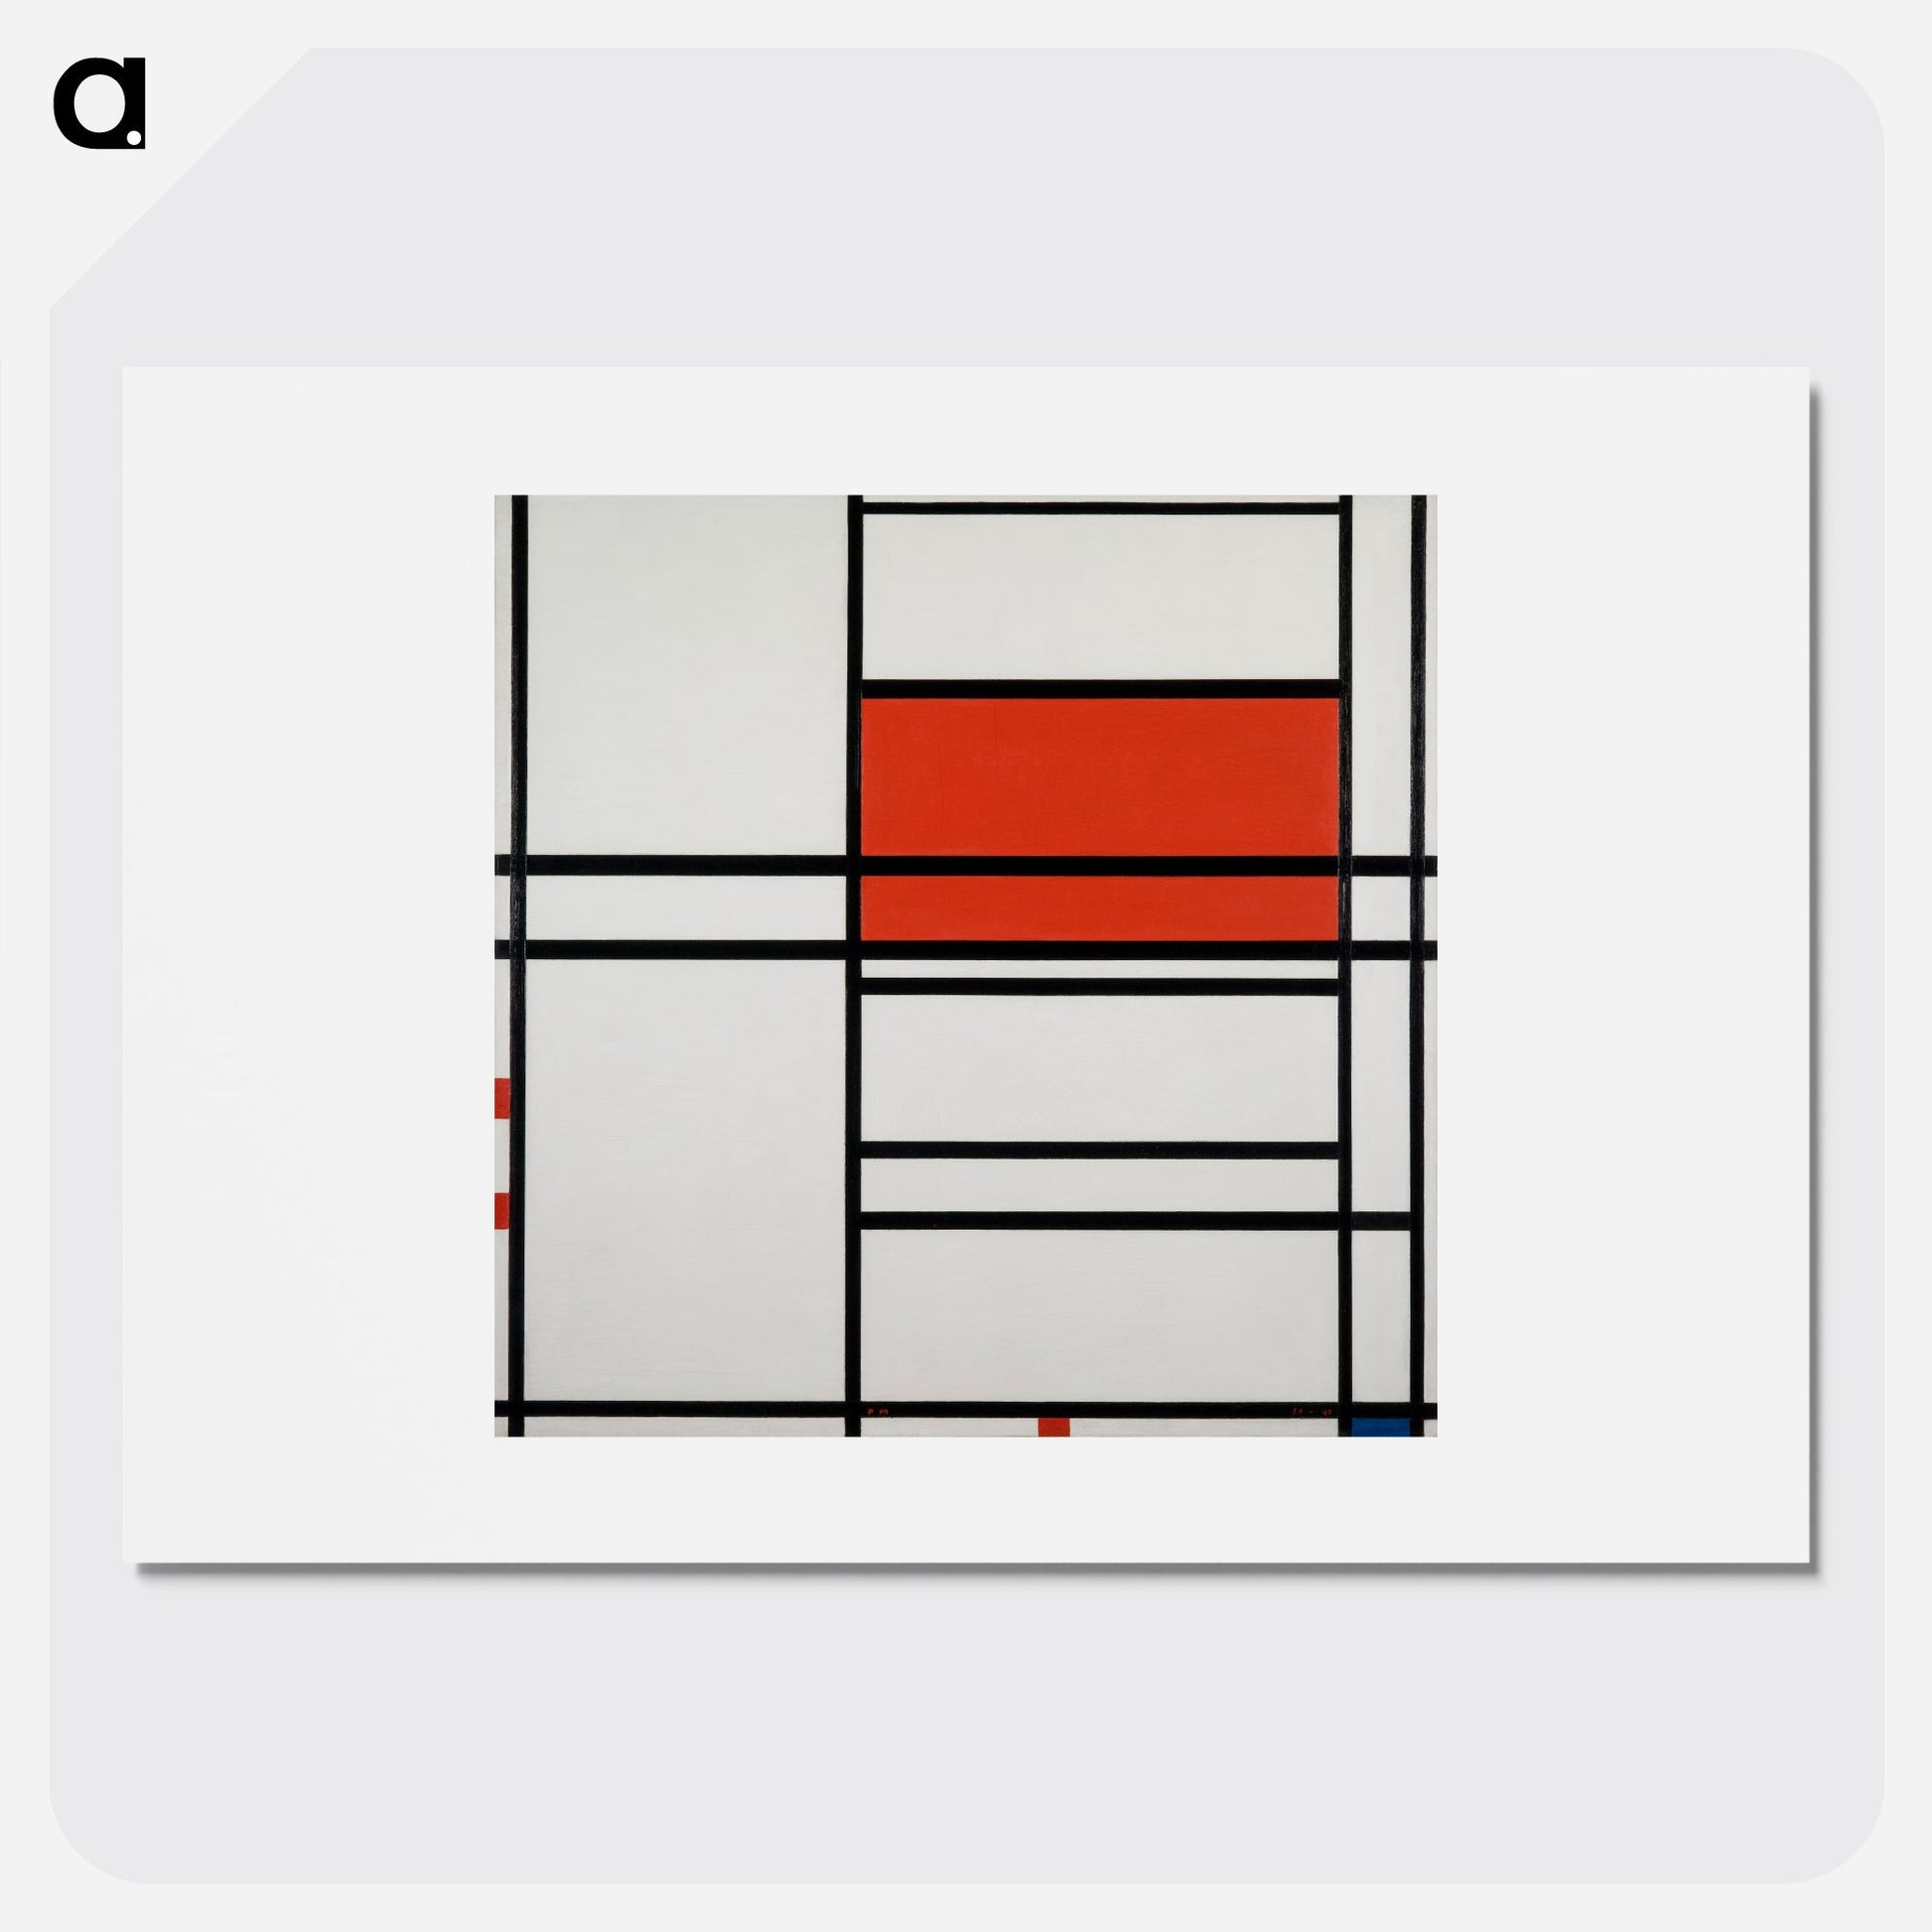 Composition of Red and White: Nom 1, Composition No. 4 with red and blue Poster. - artgraph.